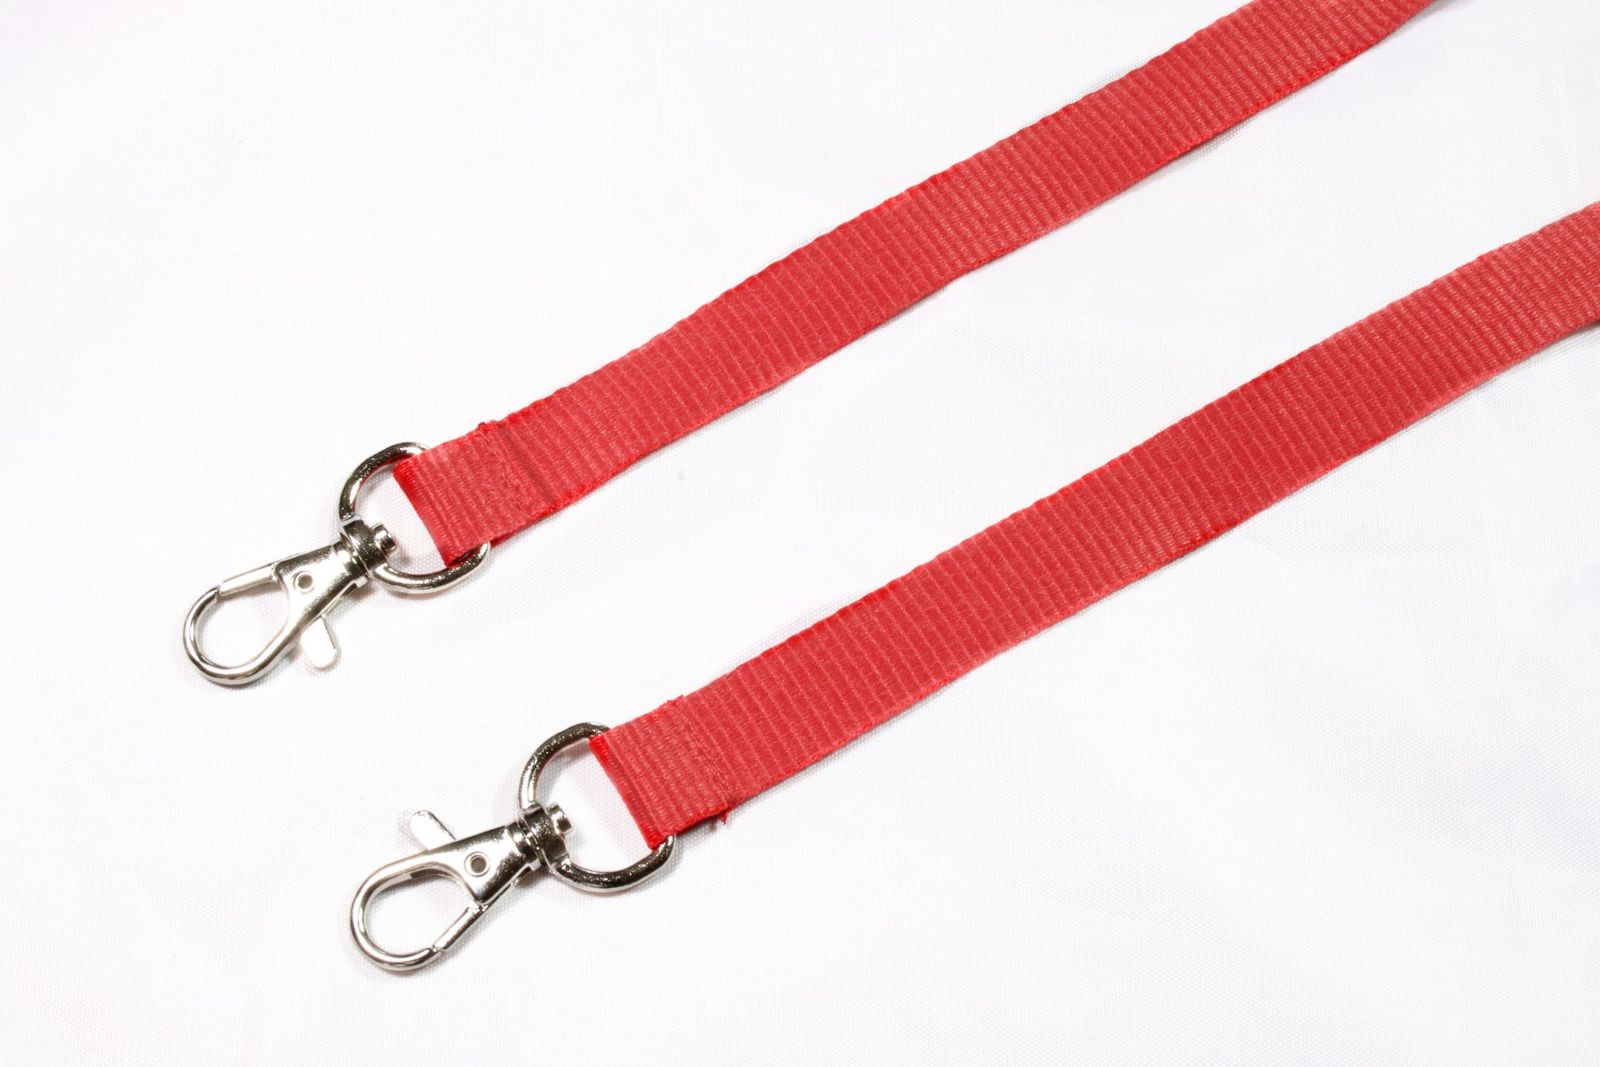 Buy Plain Red Double Ended Lanyards on Lanyards Direct Today!